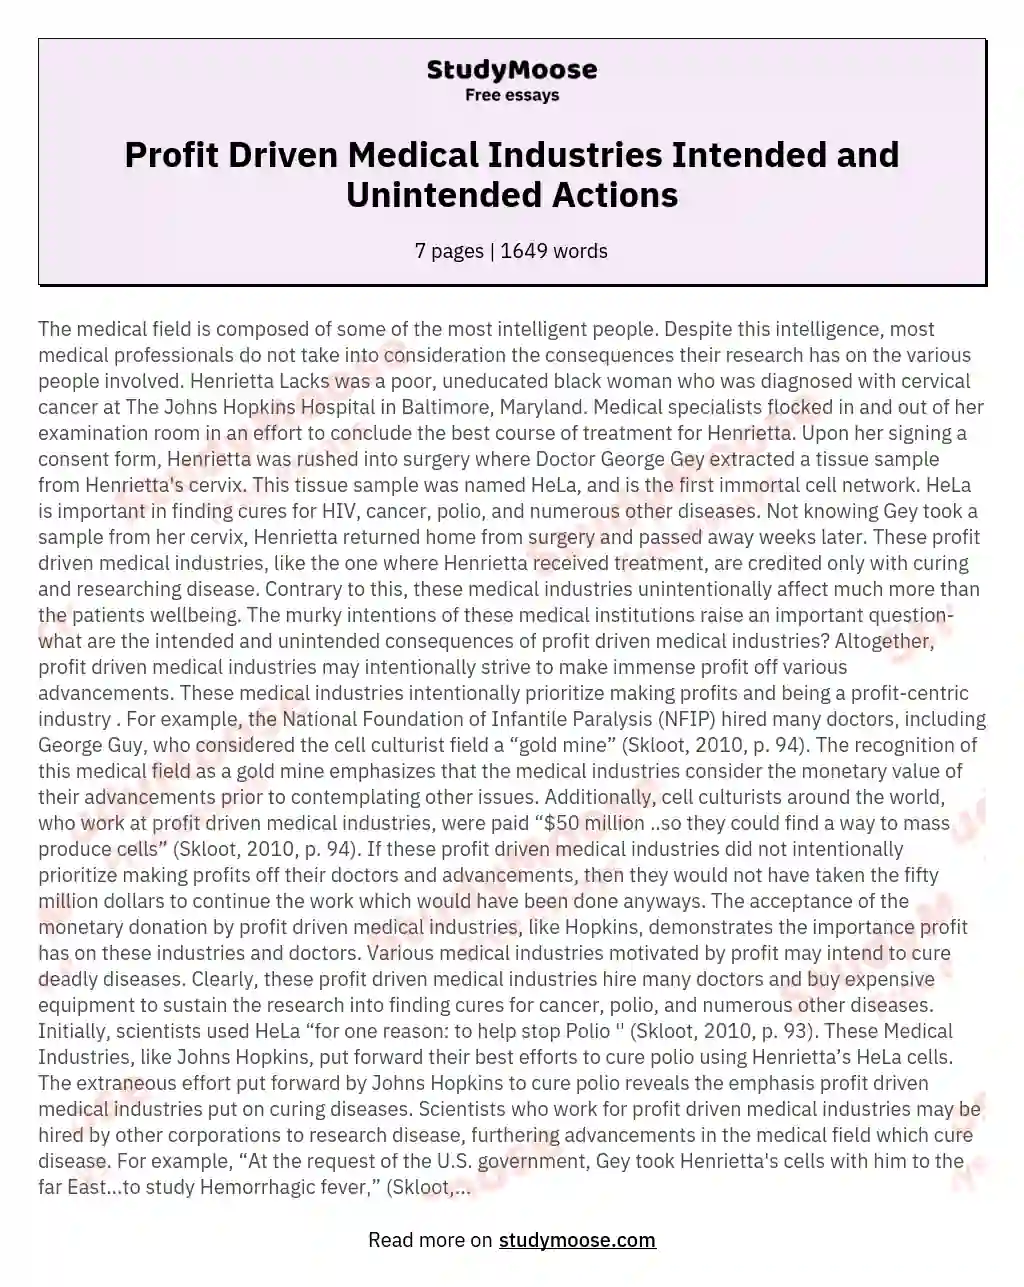 Profit Driven Medical Industries Intended and Unintended Actions essay